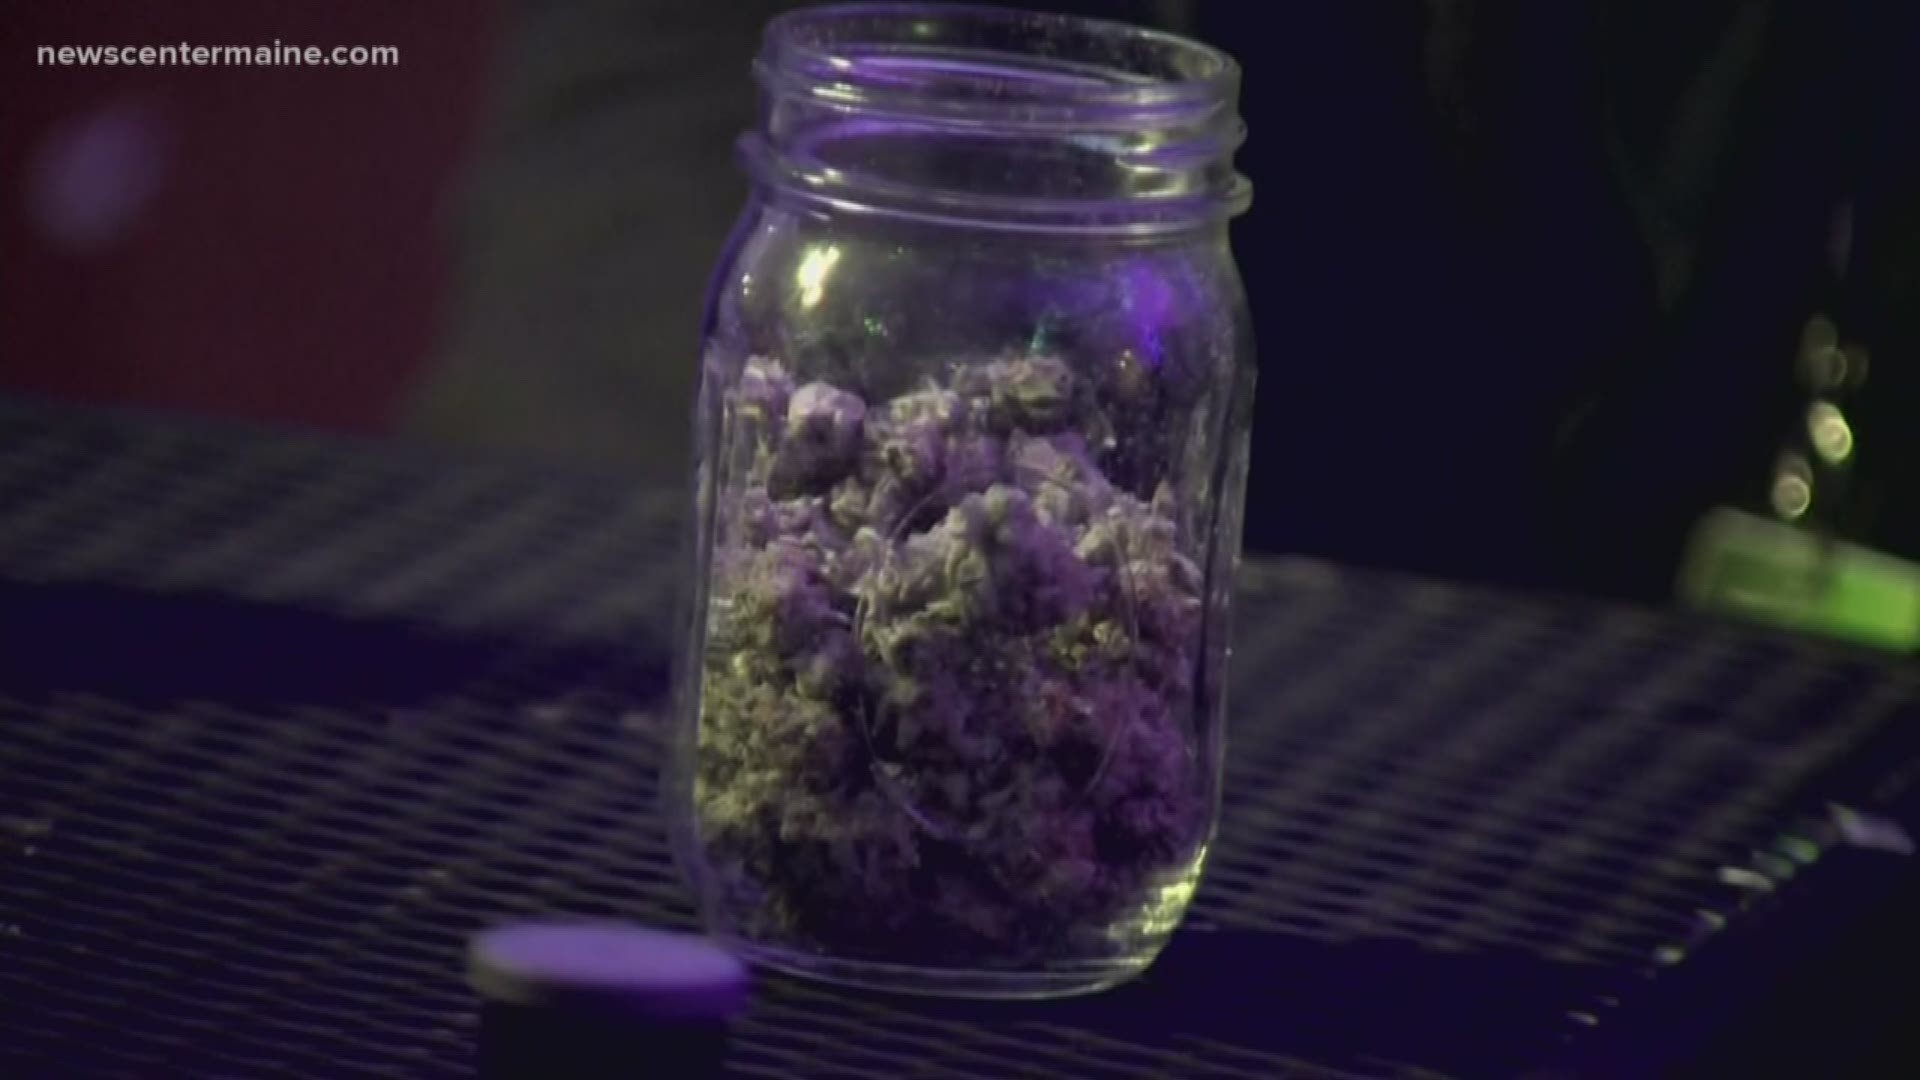 Officials in Portland are meeting Tuesday to discuss proposed regulations for retail marijuana licensing as business owners hope to cash in on legalized pot.